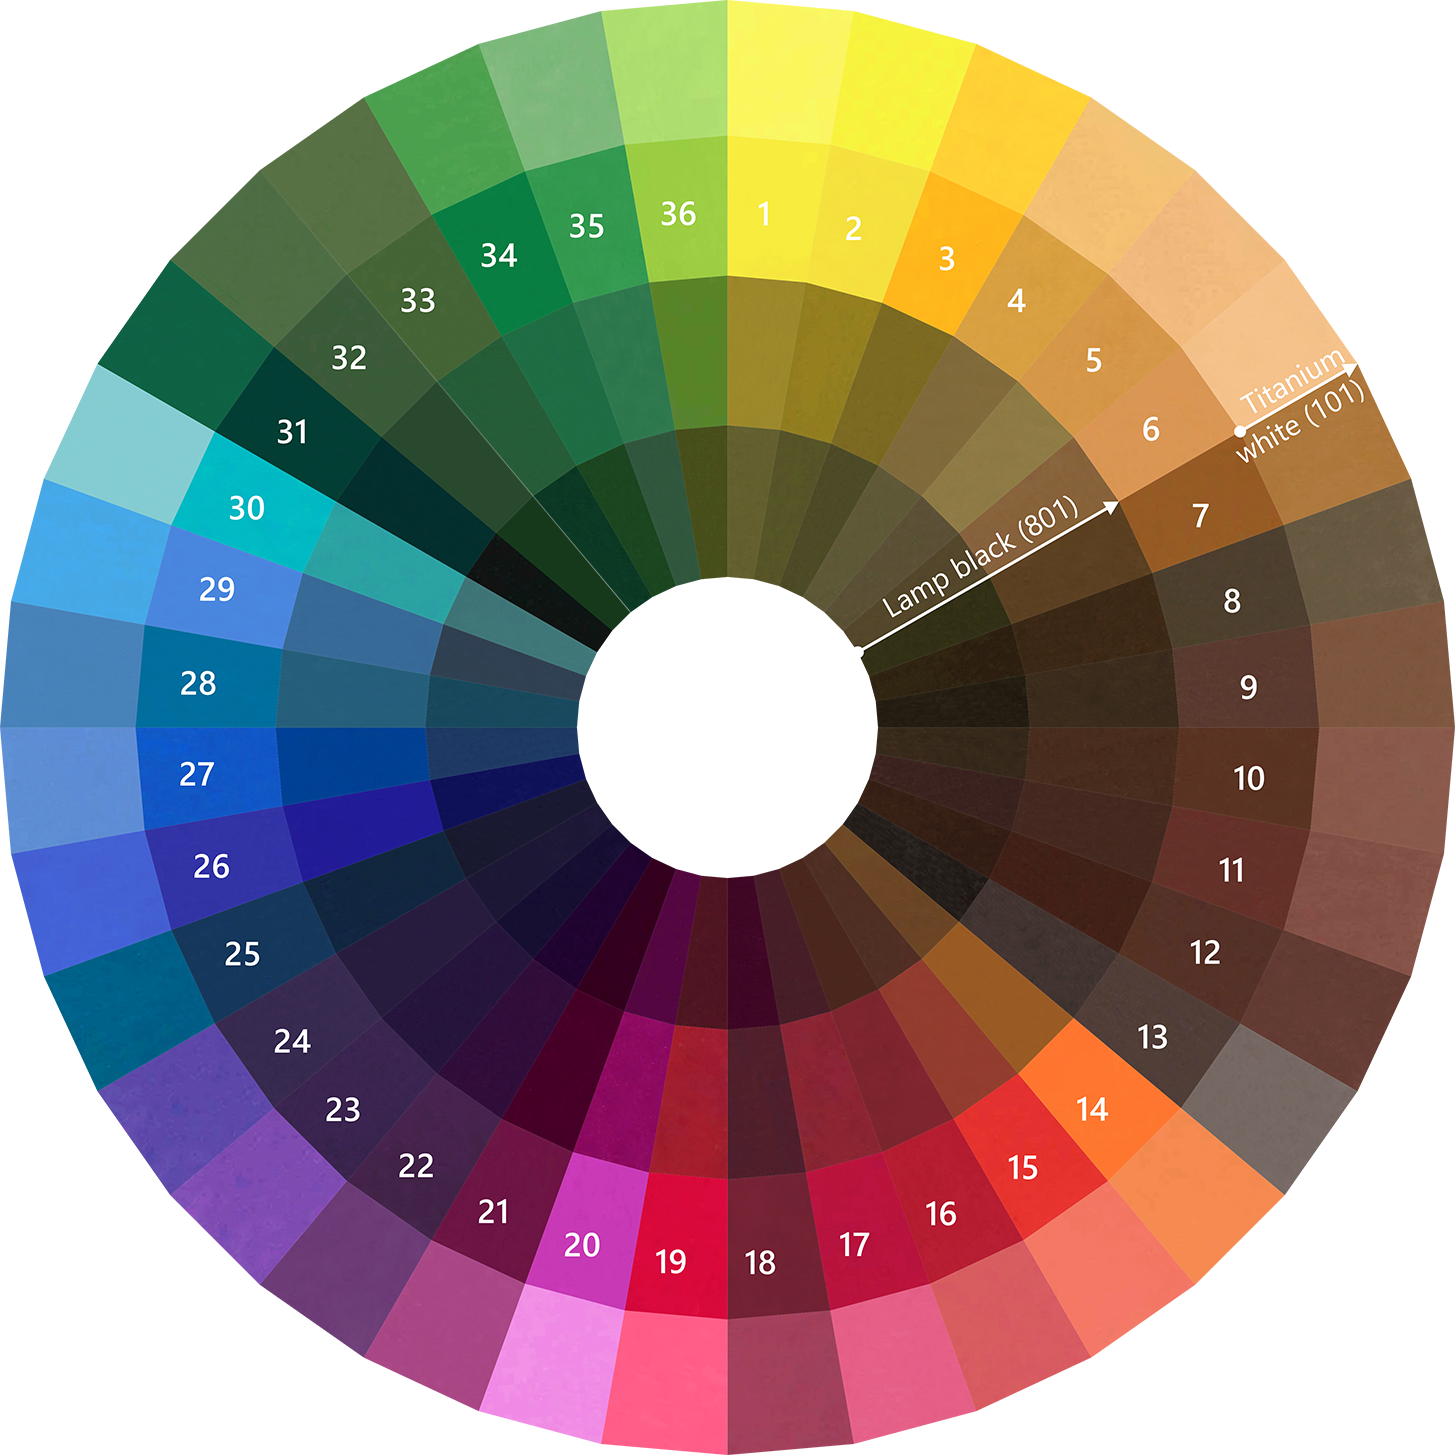 COLOUR CHART AND MIXING COLOURS